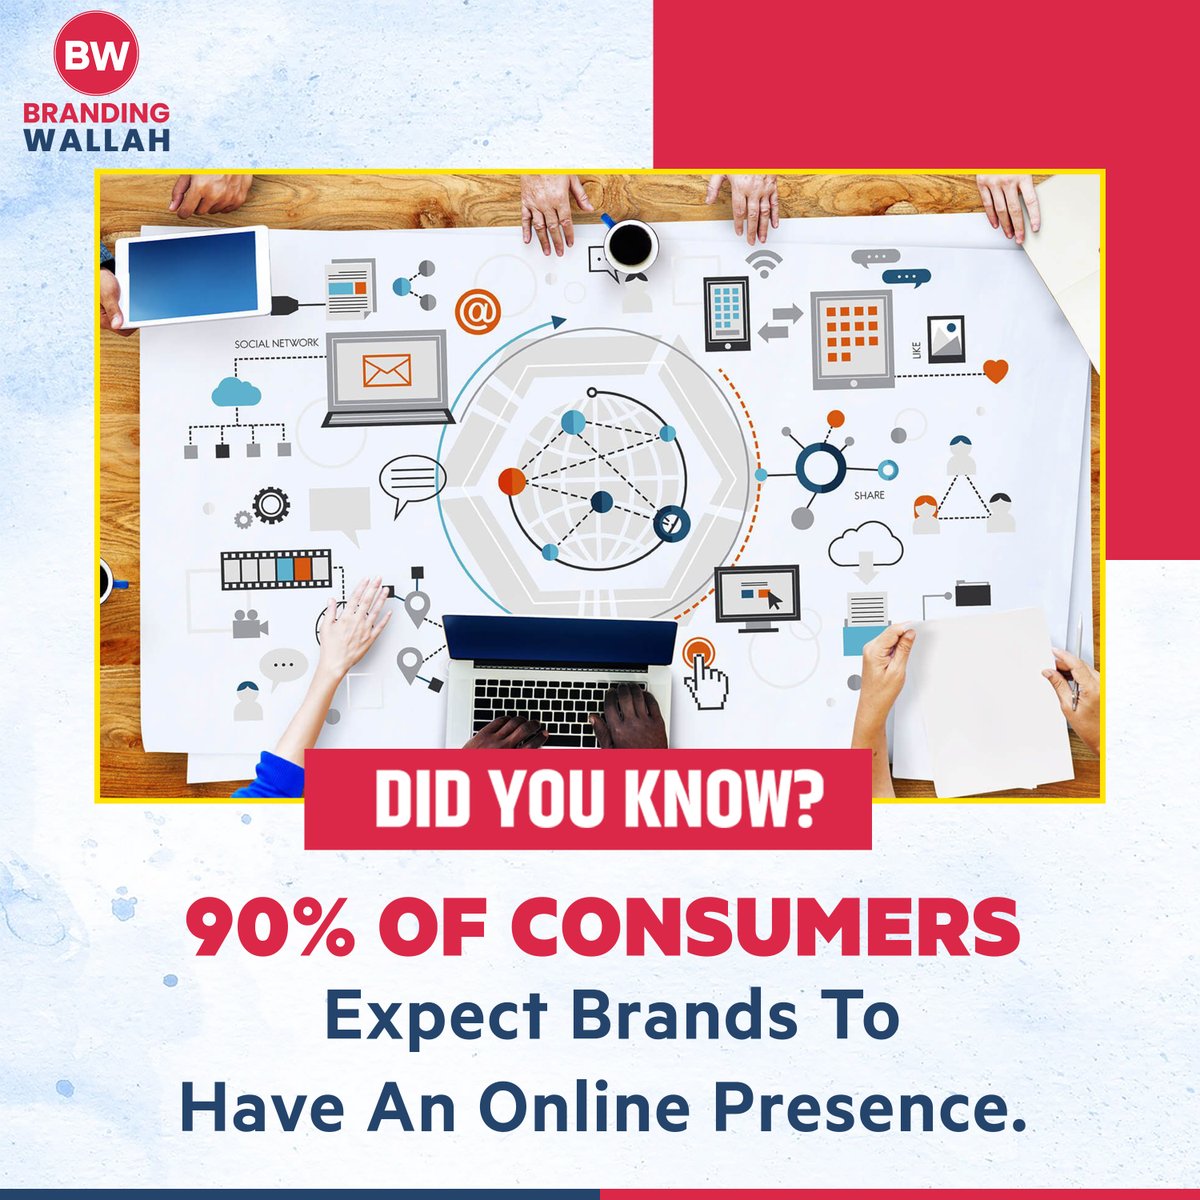 Benefits of Online Presence

🌐 Global Reach

📈 Increased Visibility

🛍️ E-commerce Opportunities

🤝 Enhanced Communication

💼 Credibility and Trust 

 #onlinepresence #onlinepresencemanagement #onlinepresencematters #onlinepresenceboost #onlinebusiness #onlinebusinesstipps